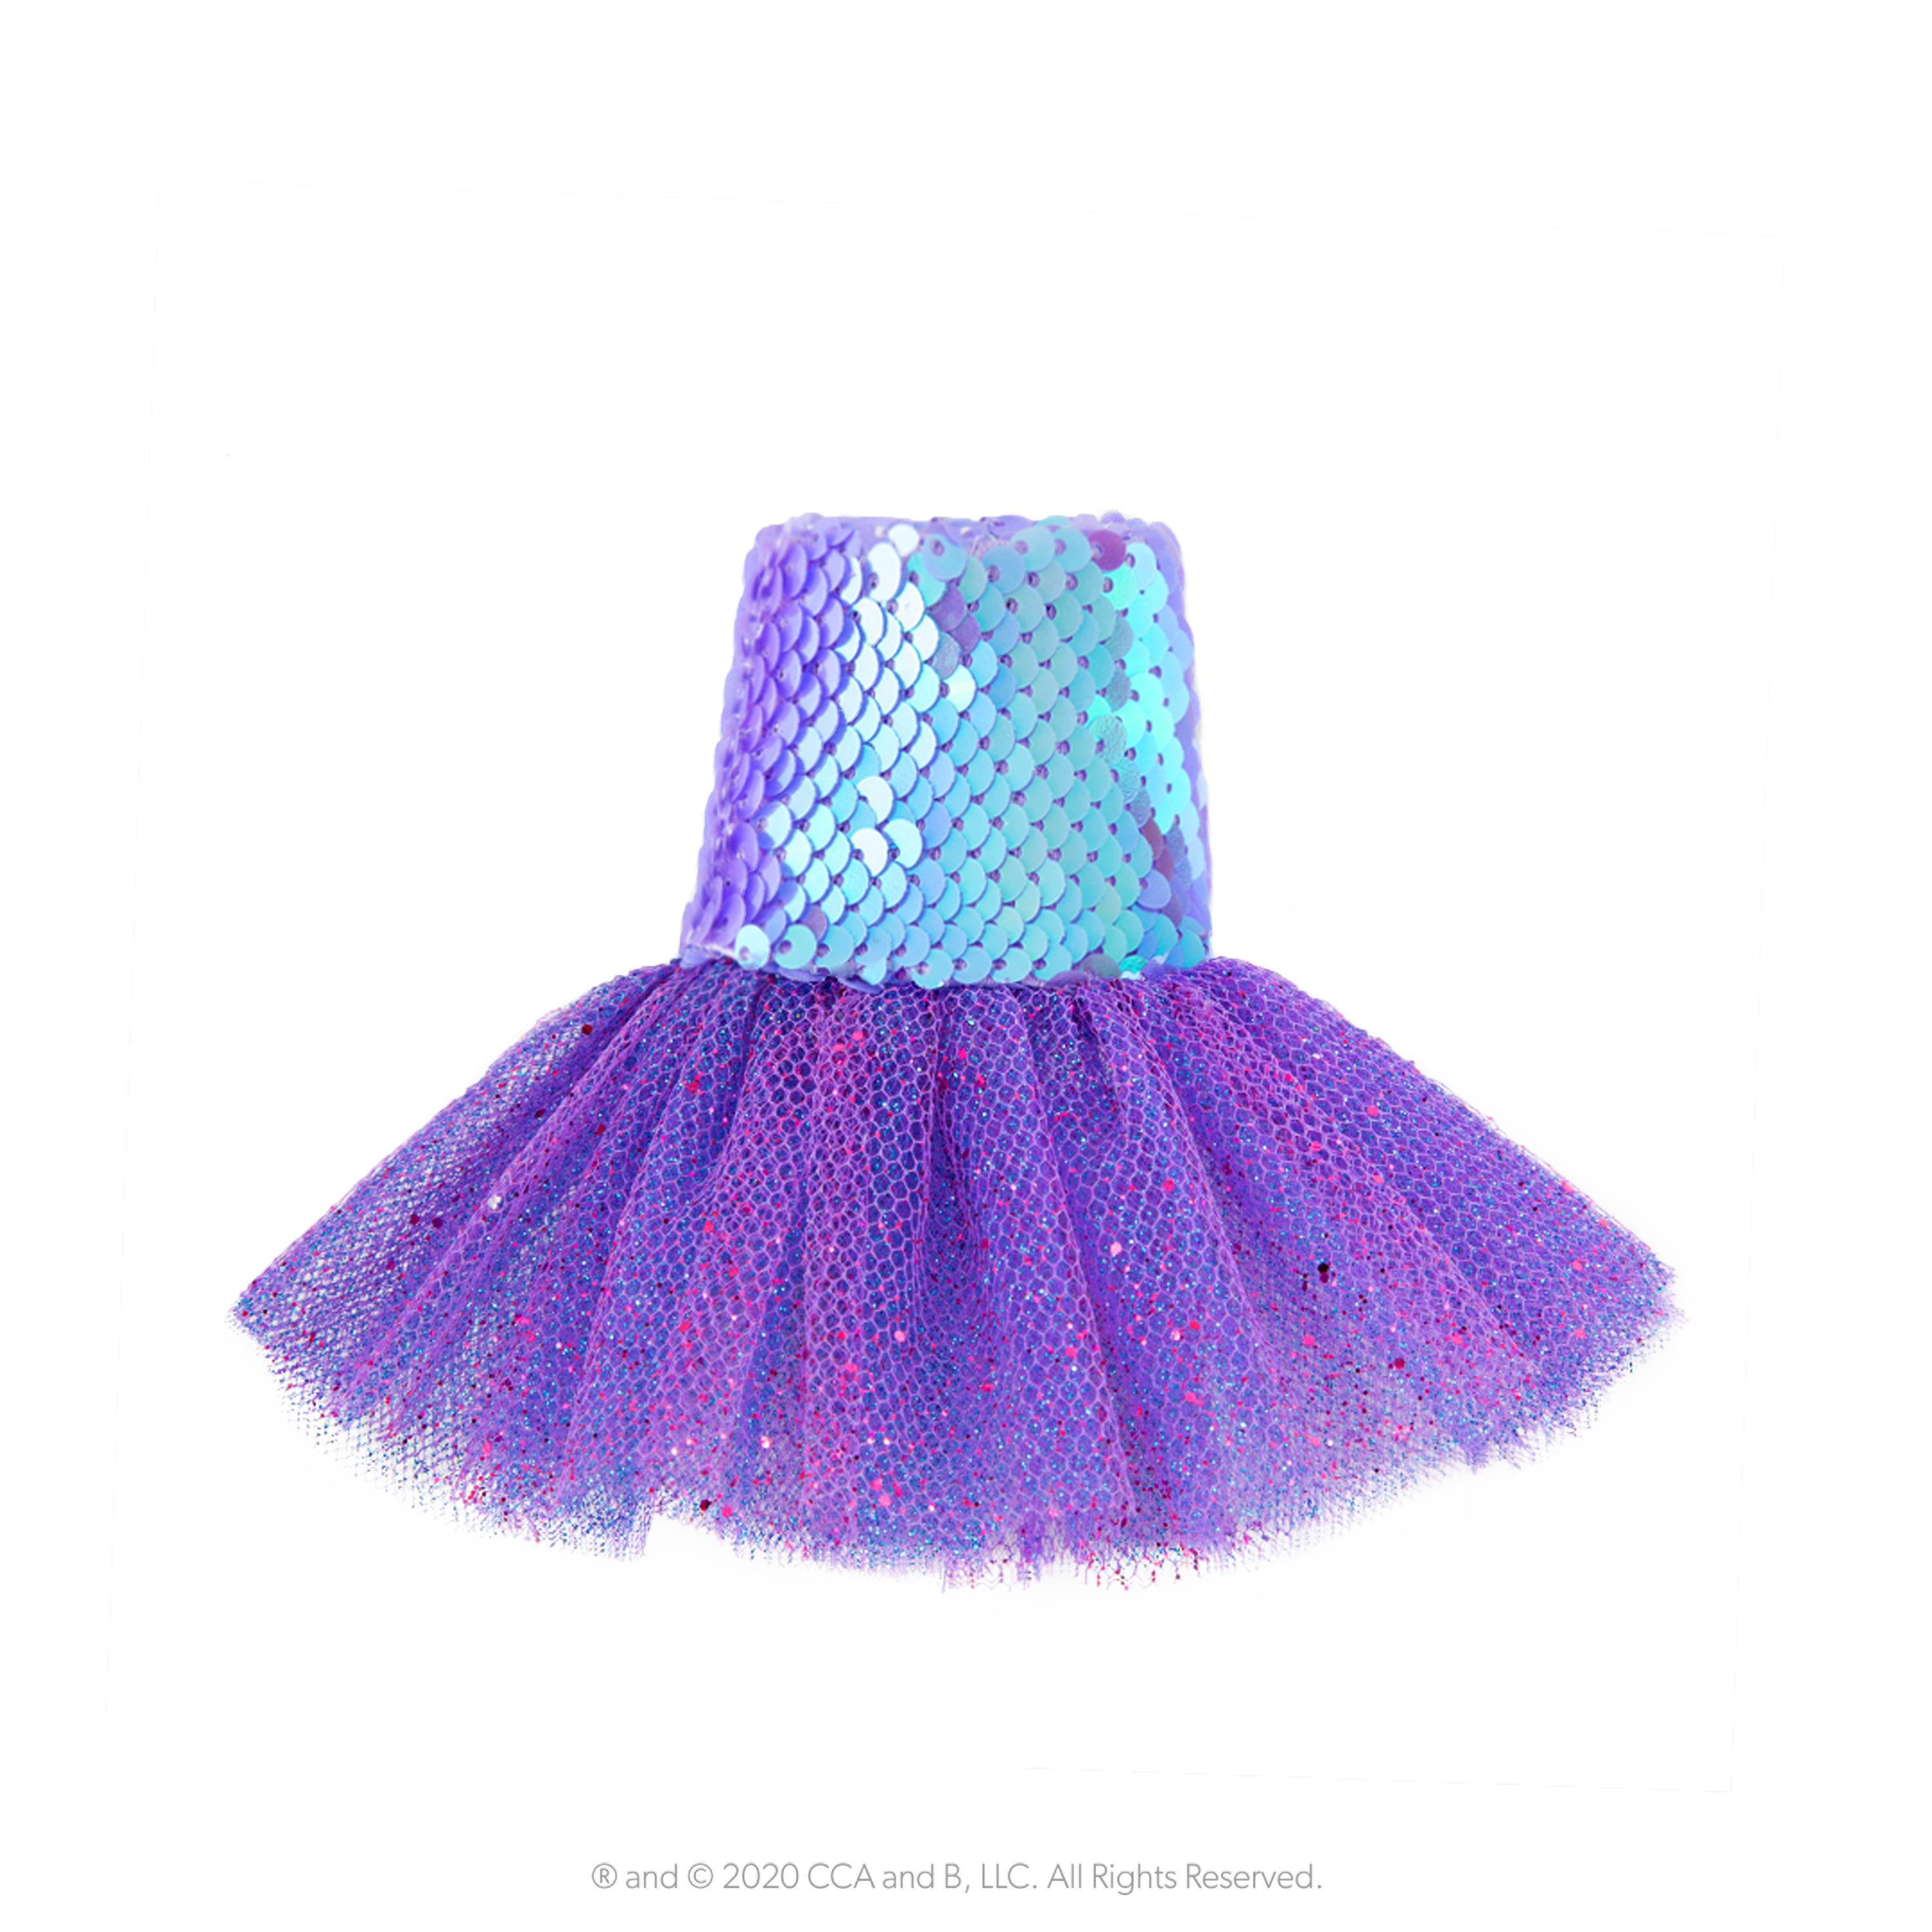 Claus Couture Sugar Plum Party Dress - image 3 of 3